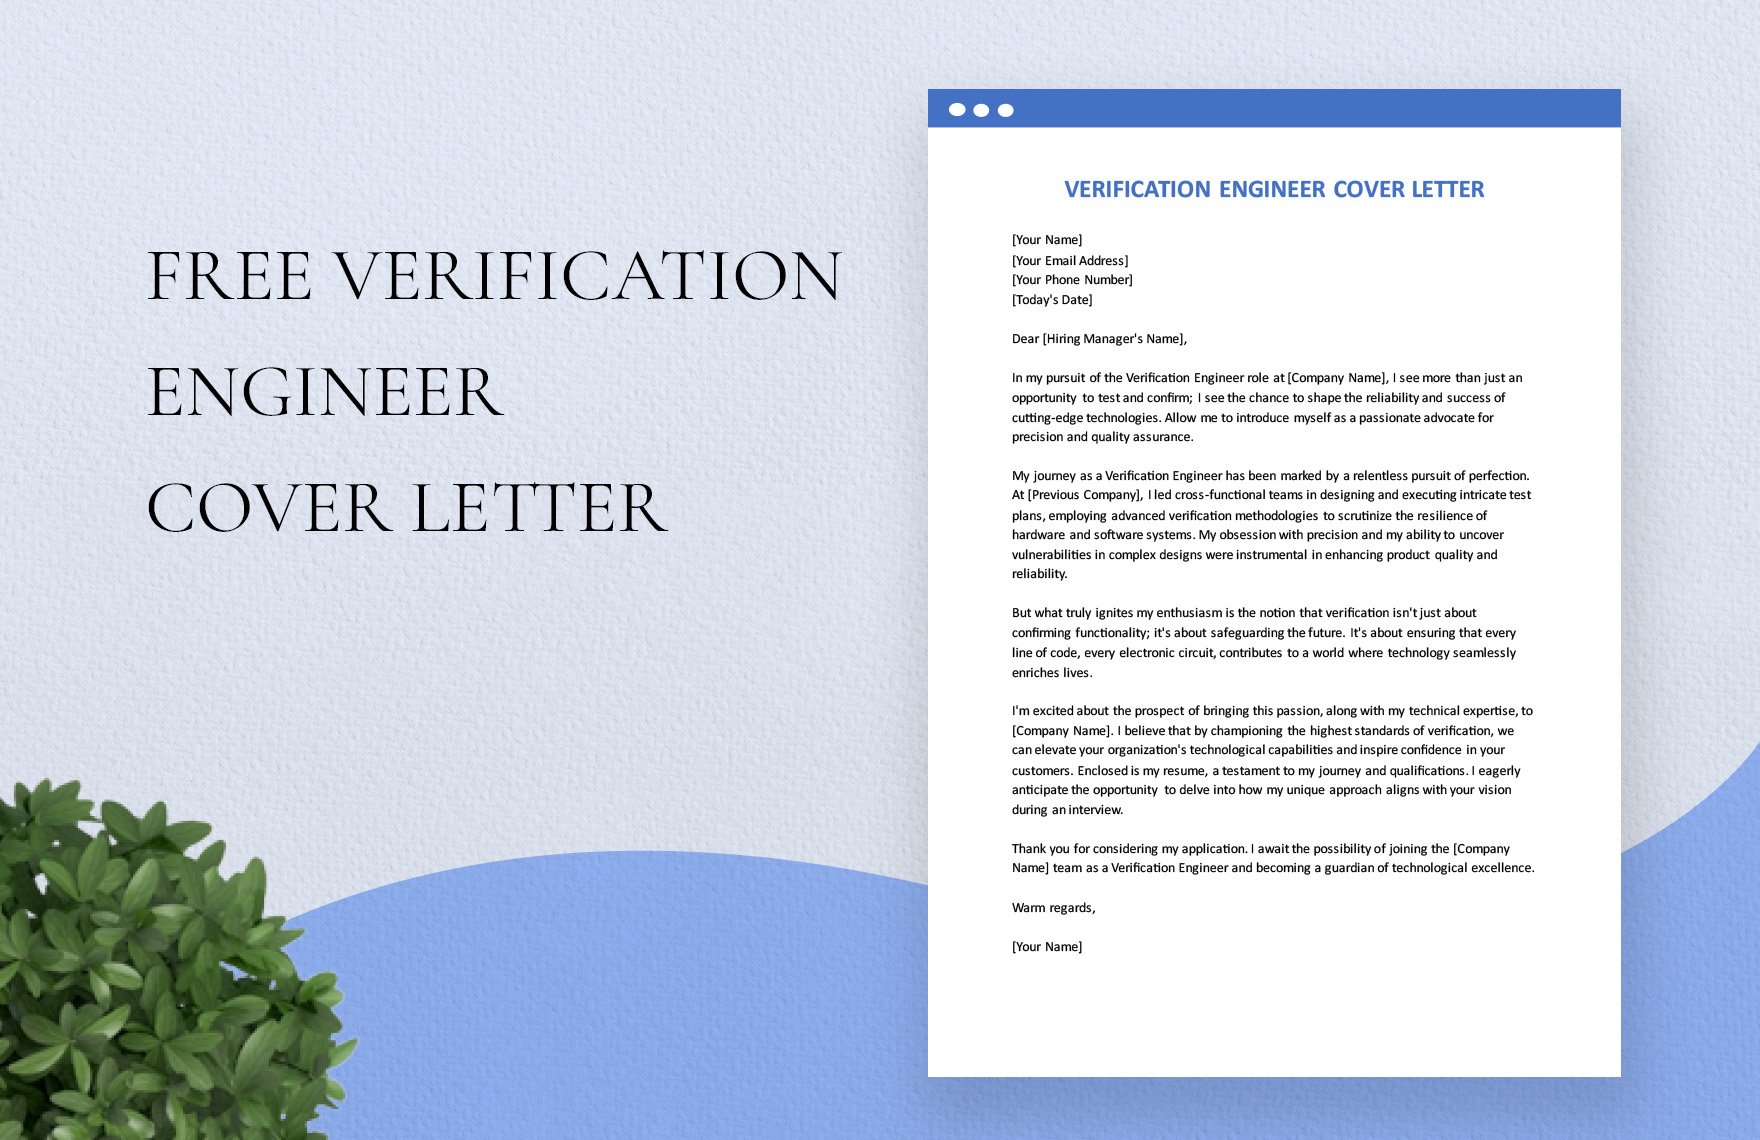 Verification Engineer Cover Letter in Word, Google Docs, PDF